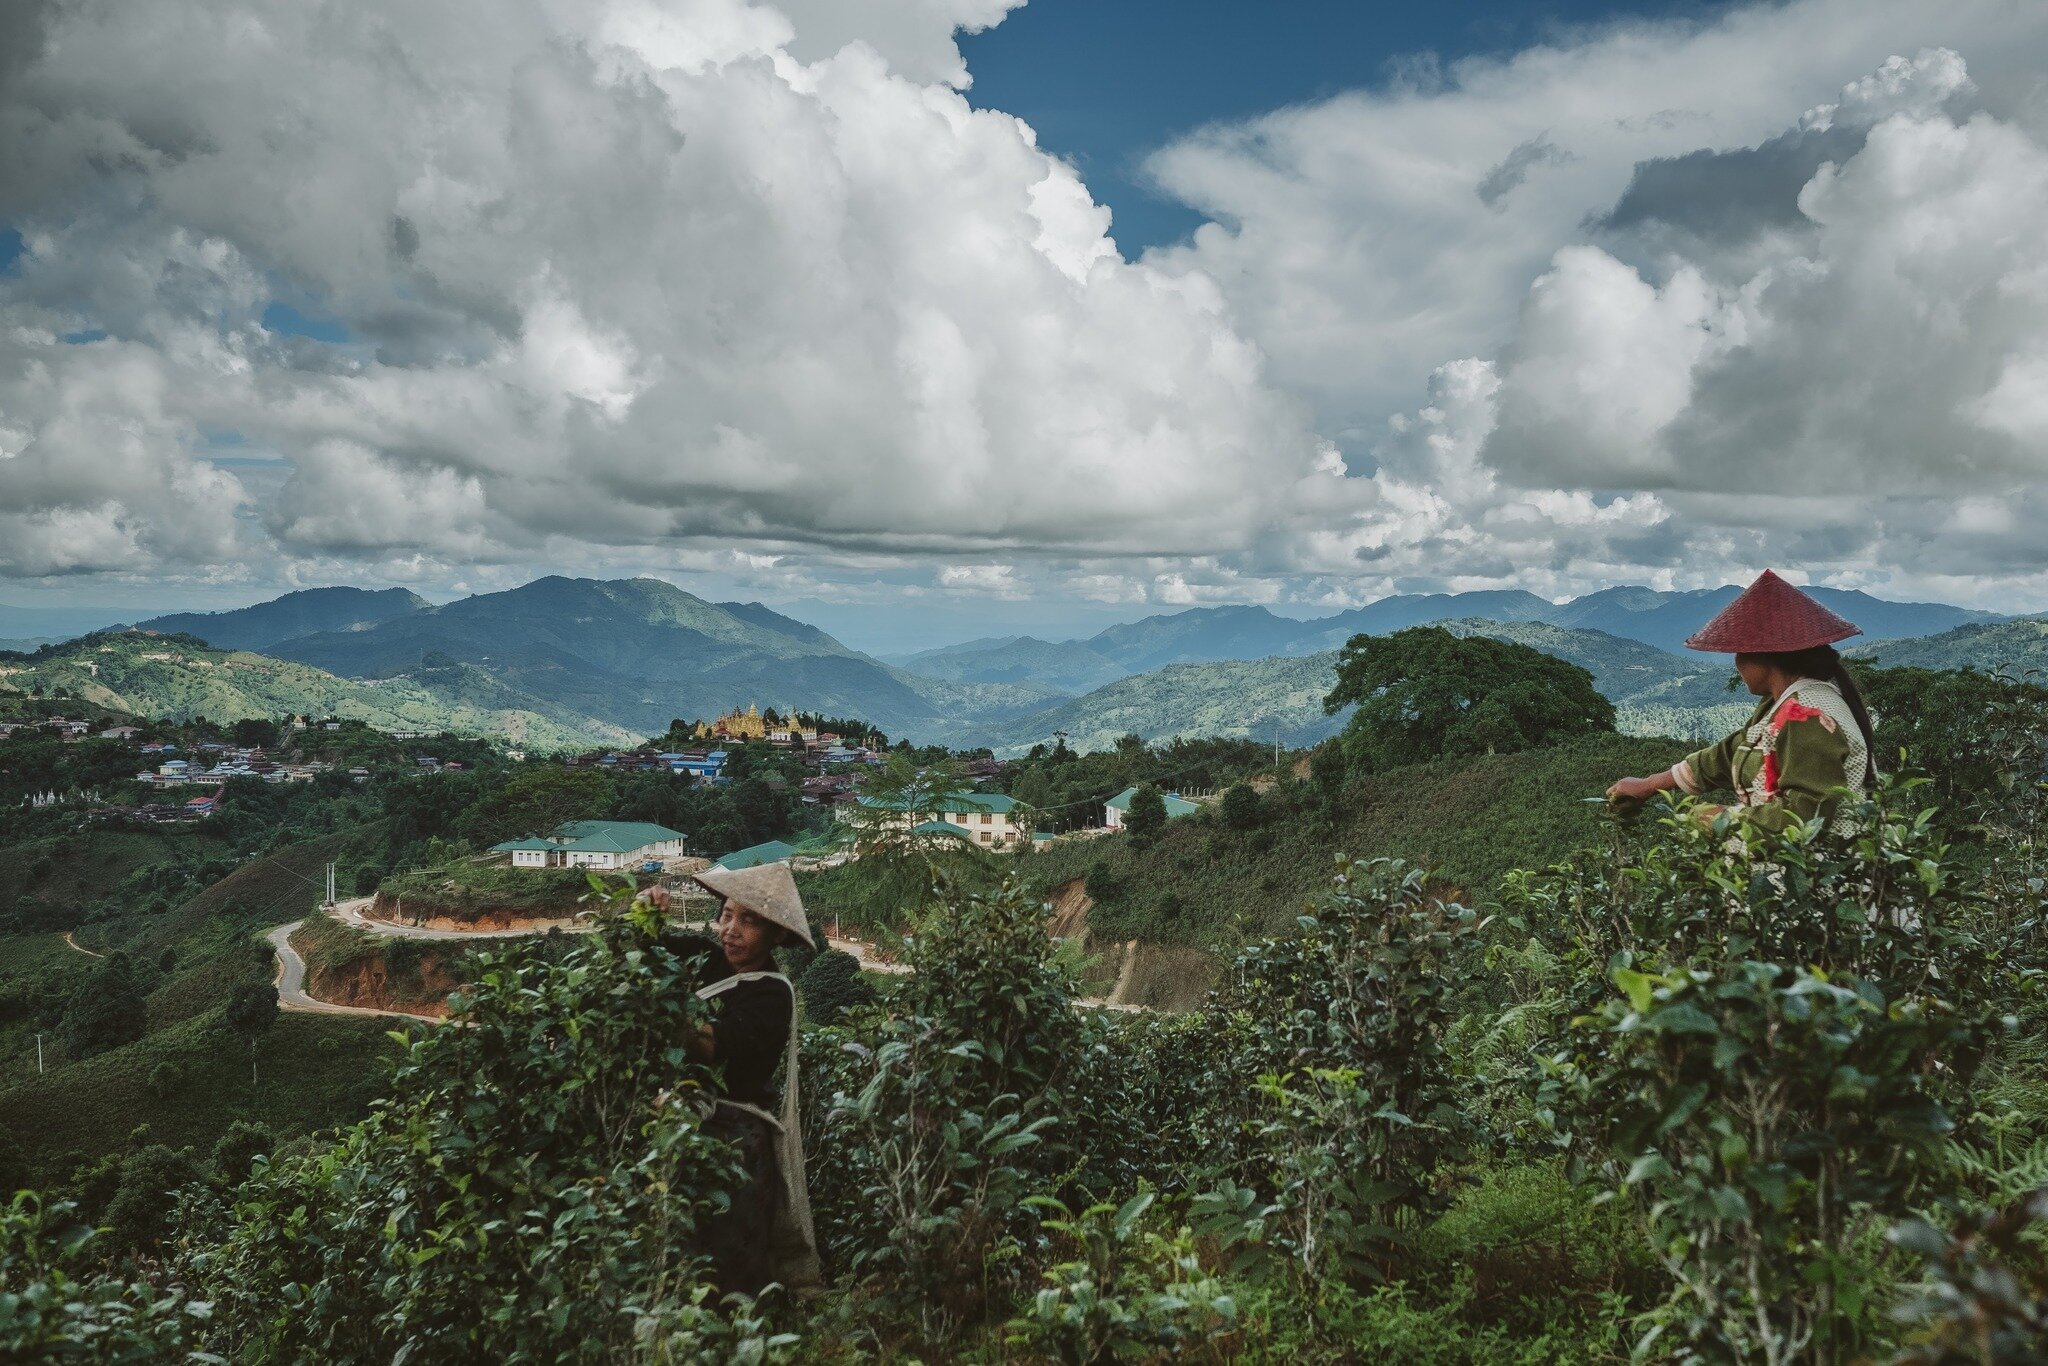 The magic behind Burma Love Foods begins in the Shan State mountains of Burma. This land covers almost a quarter of Burma and is home to the highest quality tea leaves grown today. After years of trade embargoes, it is remarkable that these tea leave